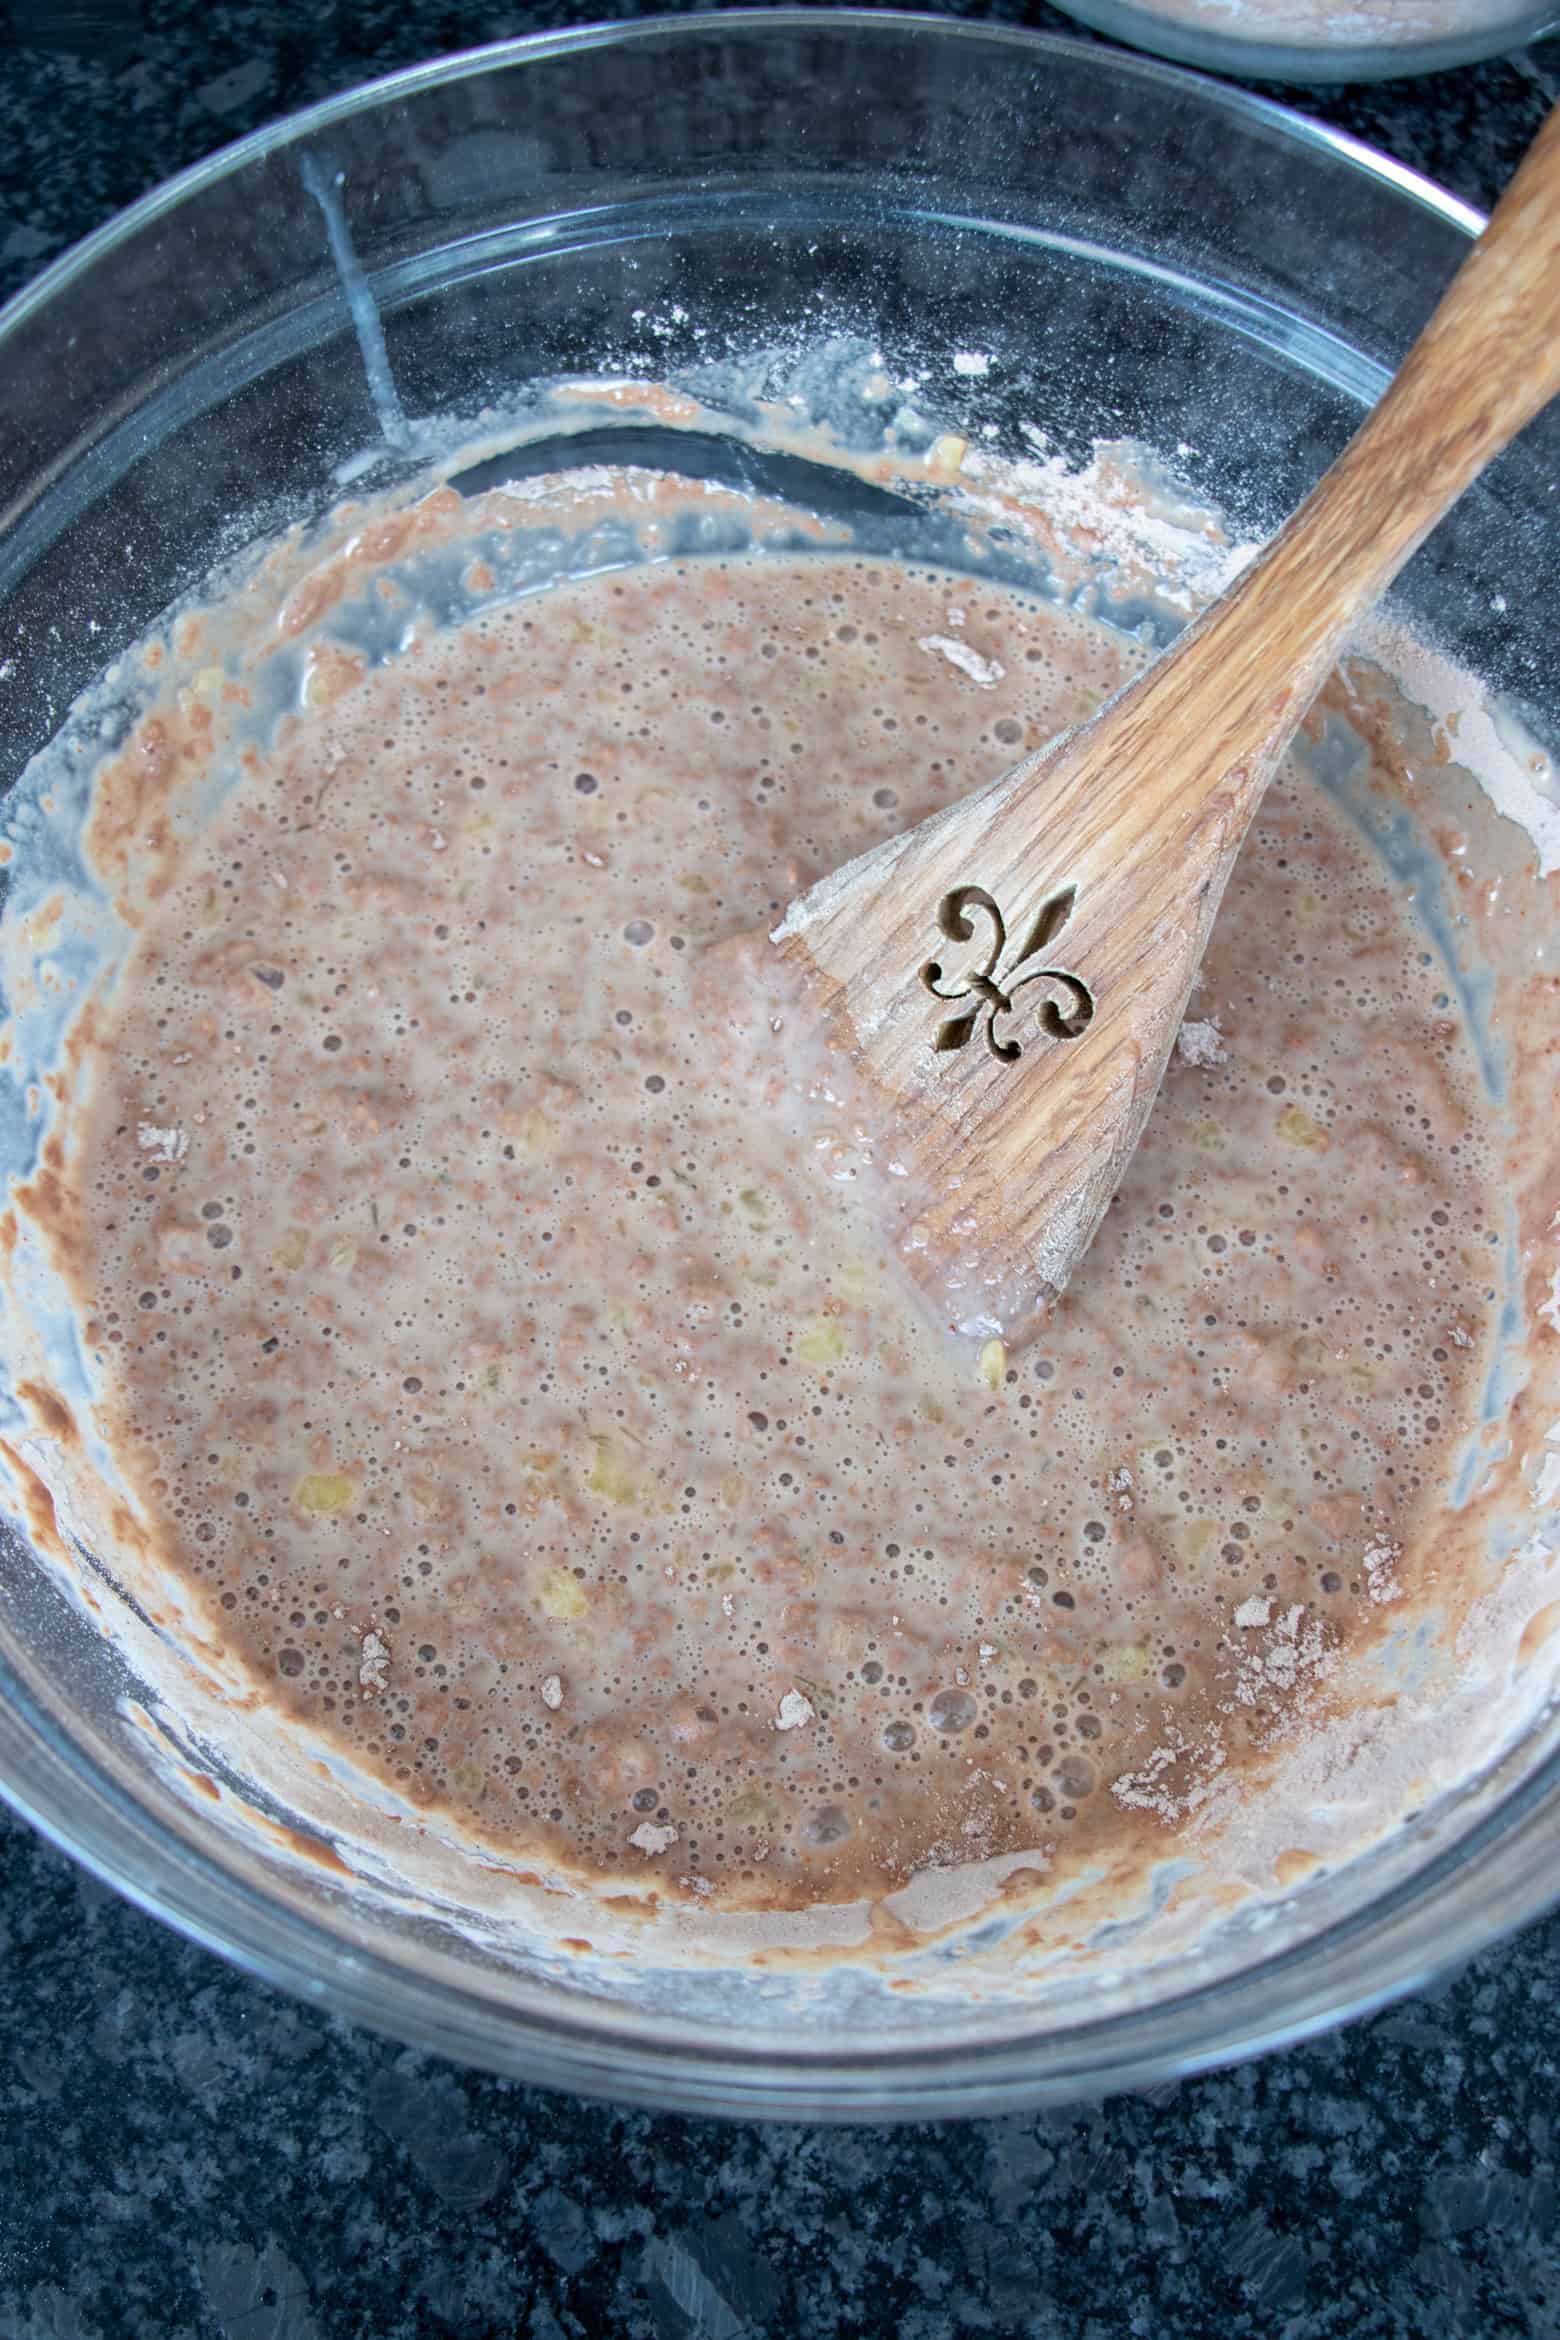 Flour mixture combined with yeast mixture in a bowl.